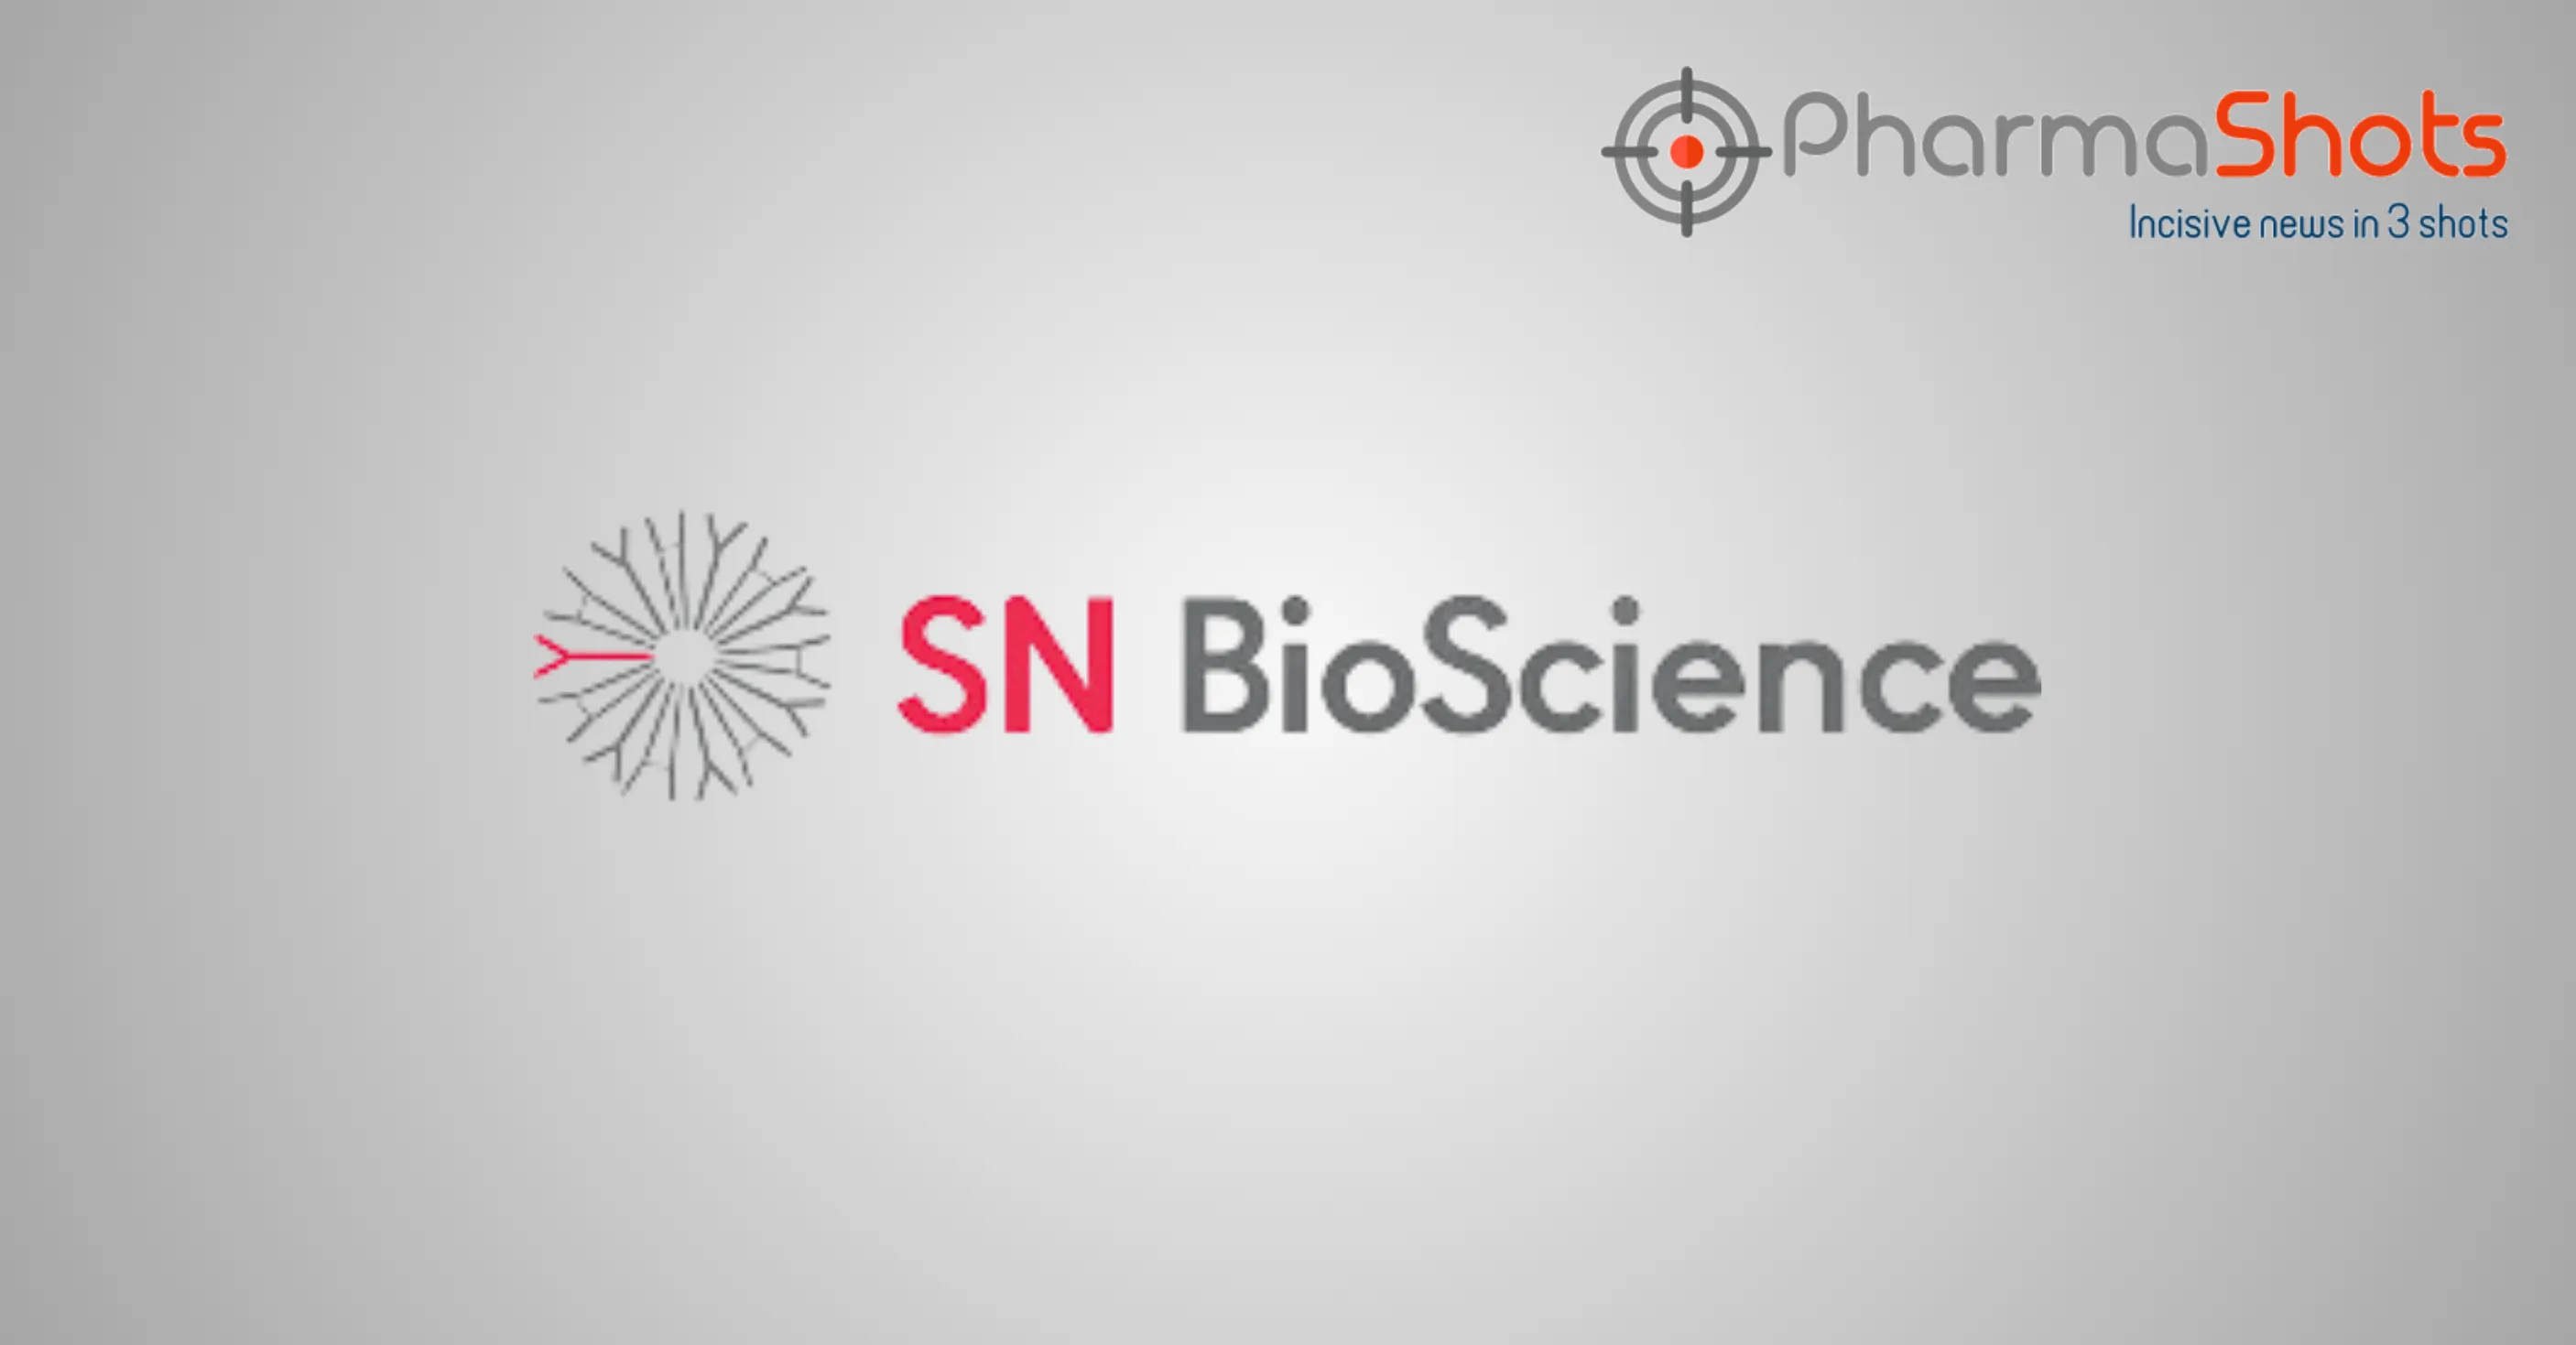 SN BioScience’s SNB-101 Gains Orphan Drug Designation from the US FDA for the Treatment of Pancreatic Cancer